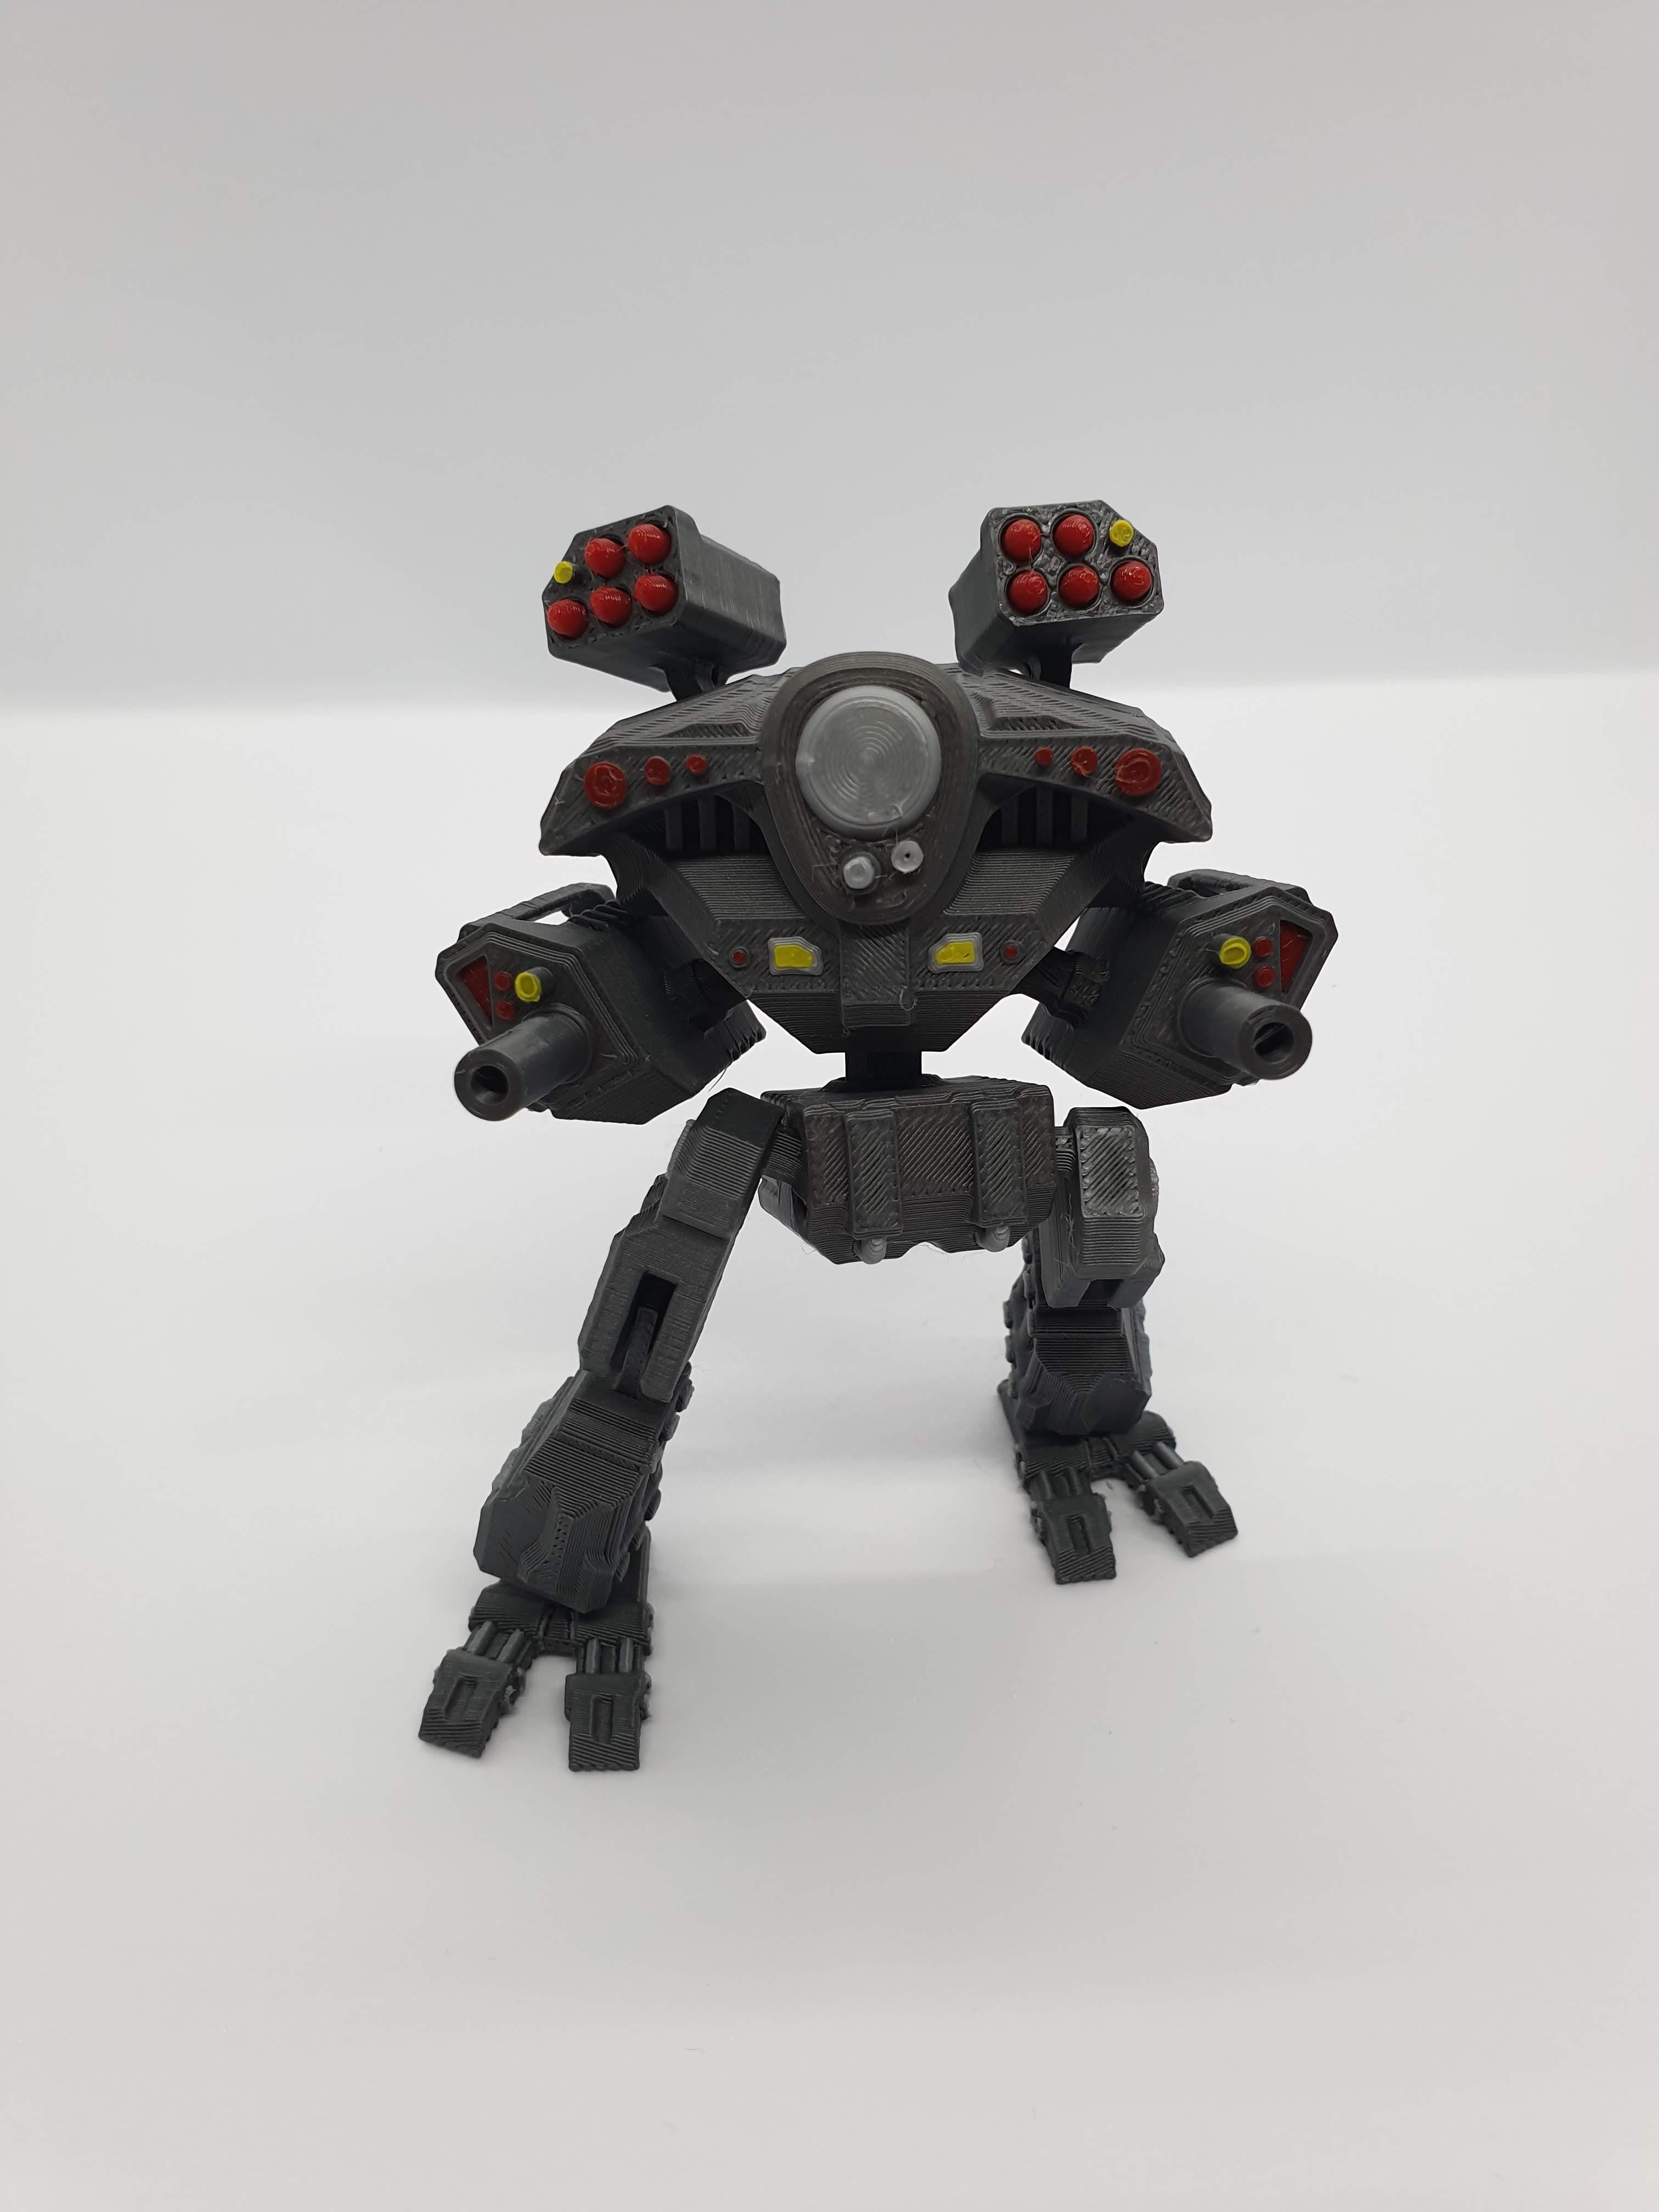 Articulated Mech released!